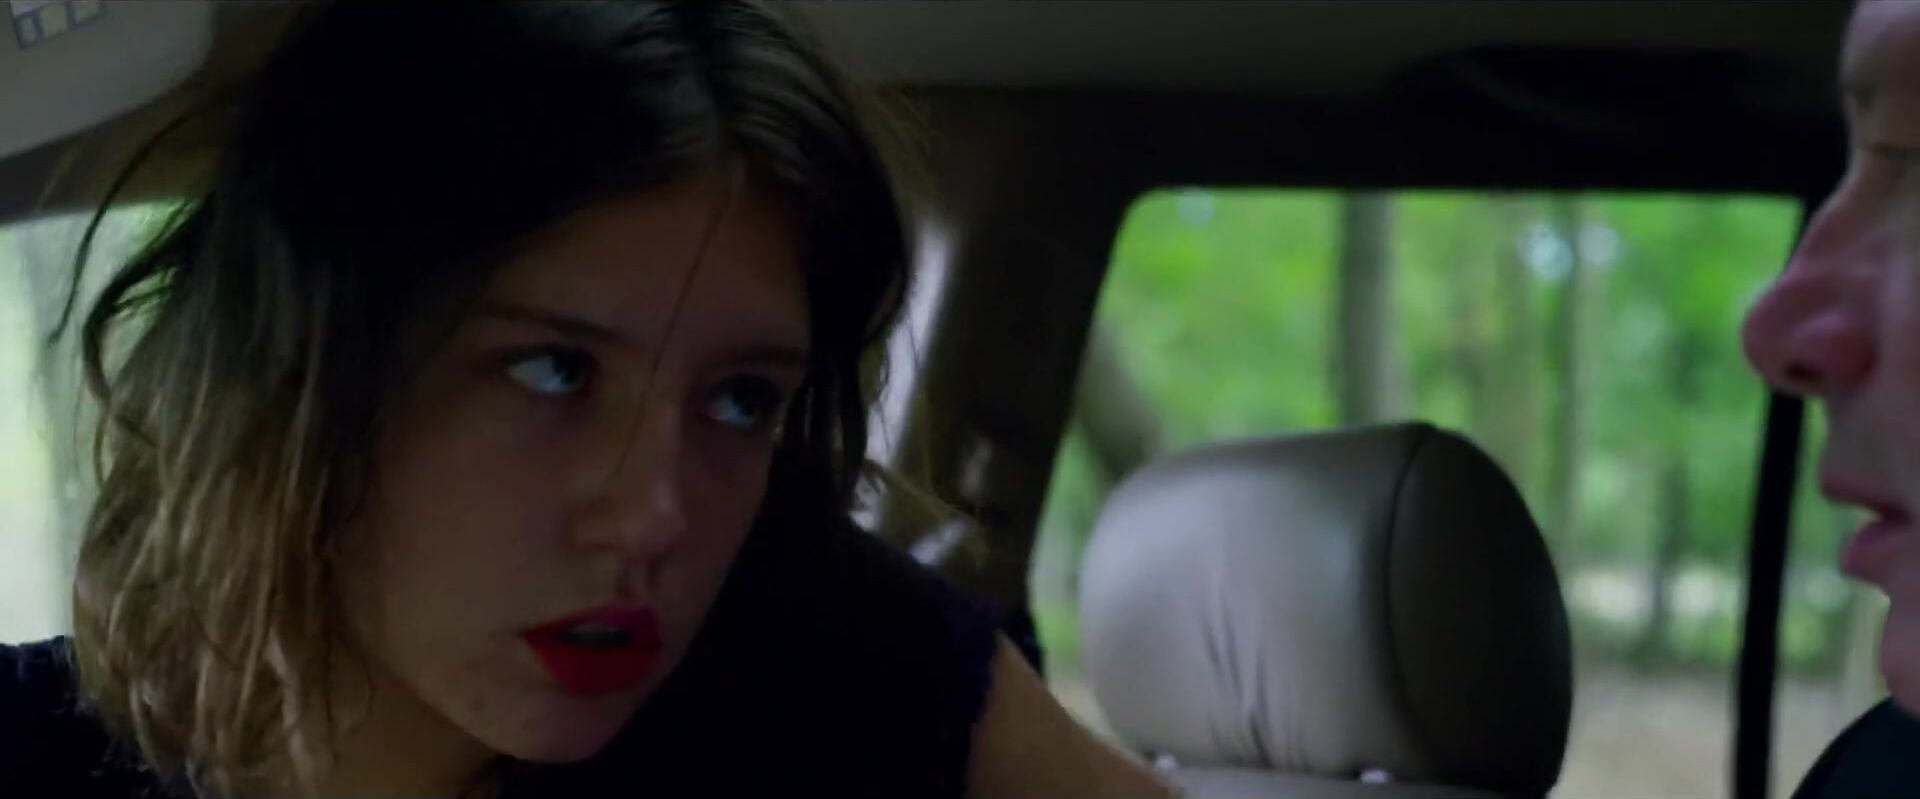 IndianXtube Adele Exarchopoulos and other French girls naked fool around in Orpheline (2016) FindTubes - 1